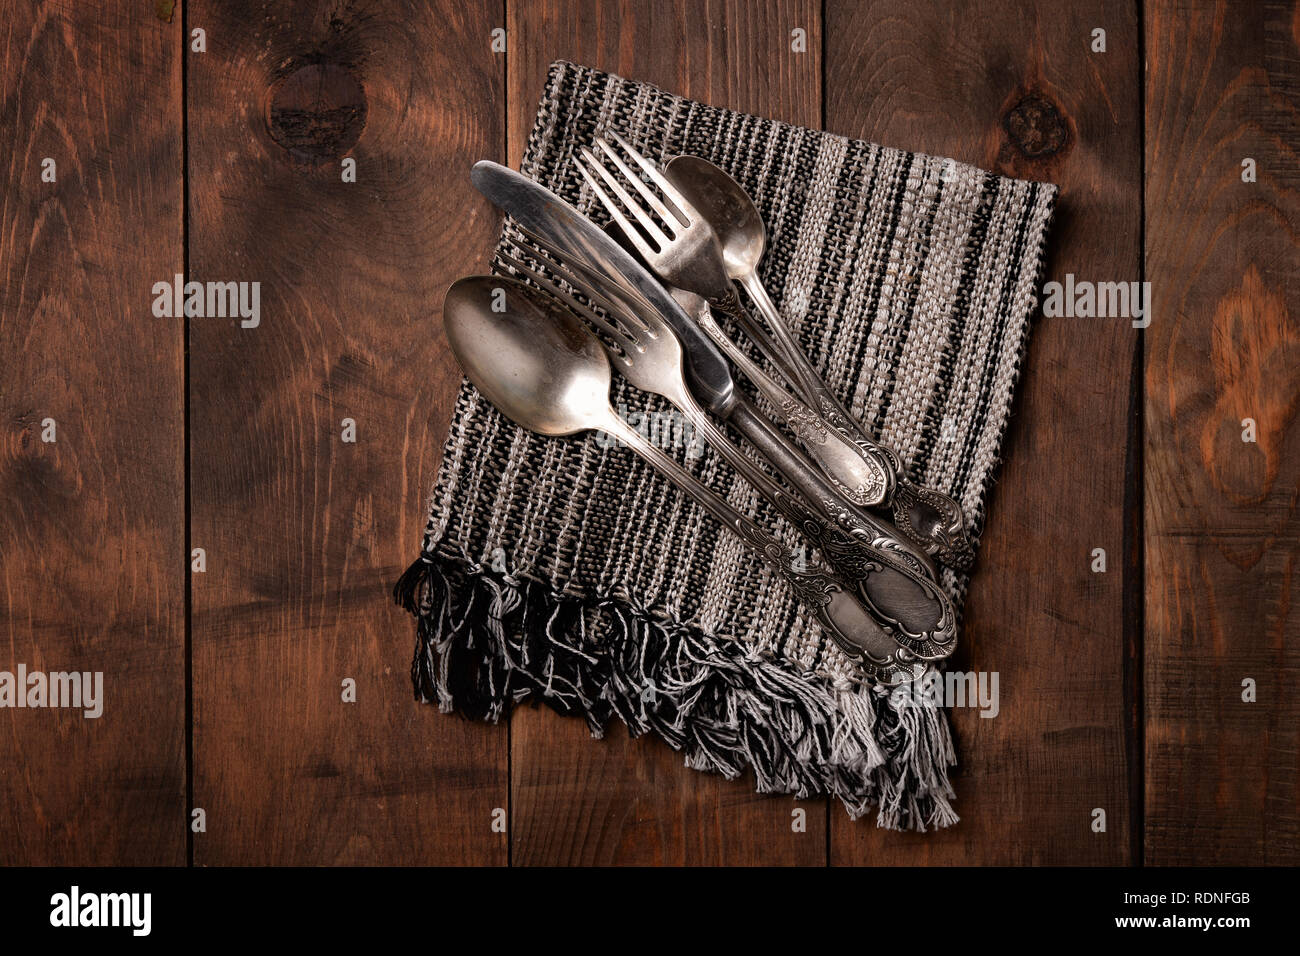 Top view of old silver cutlery on wooden table Stock Photo